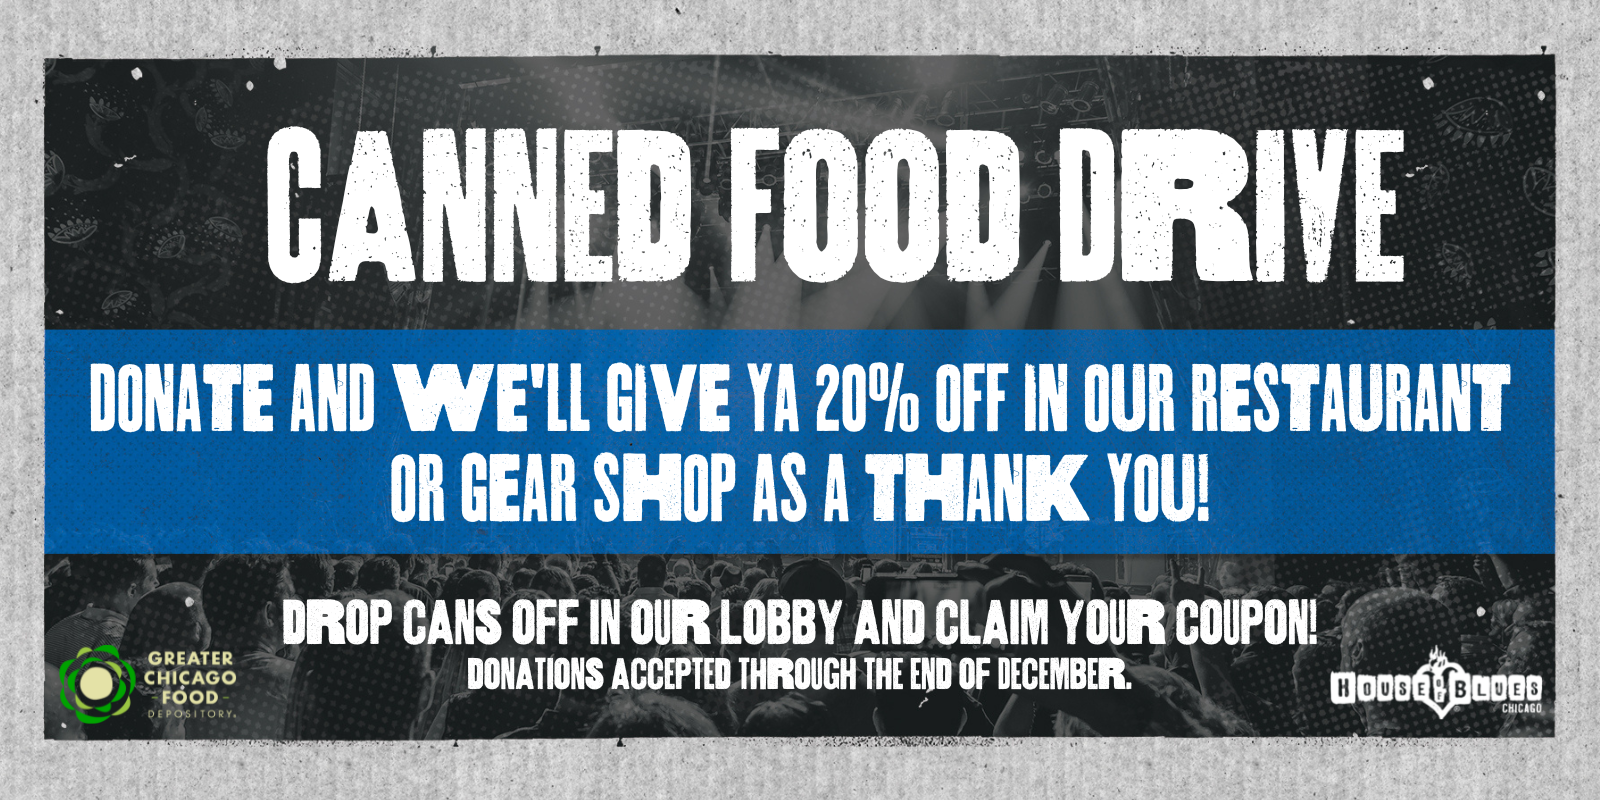 Canned Food Drive, Donate and get 20% off in our Restaurant or Gear Shop! Drop Cans off in our lobby through the end of December